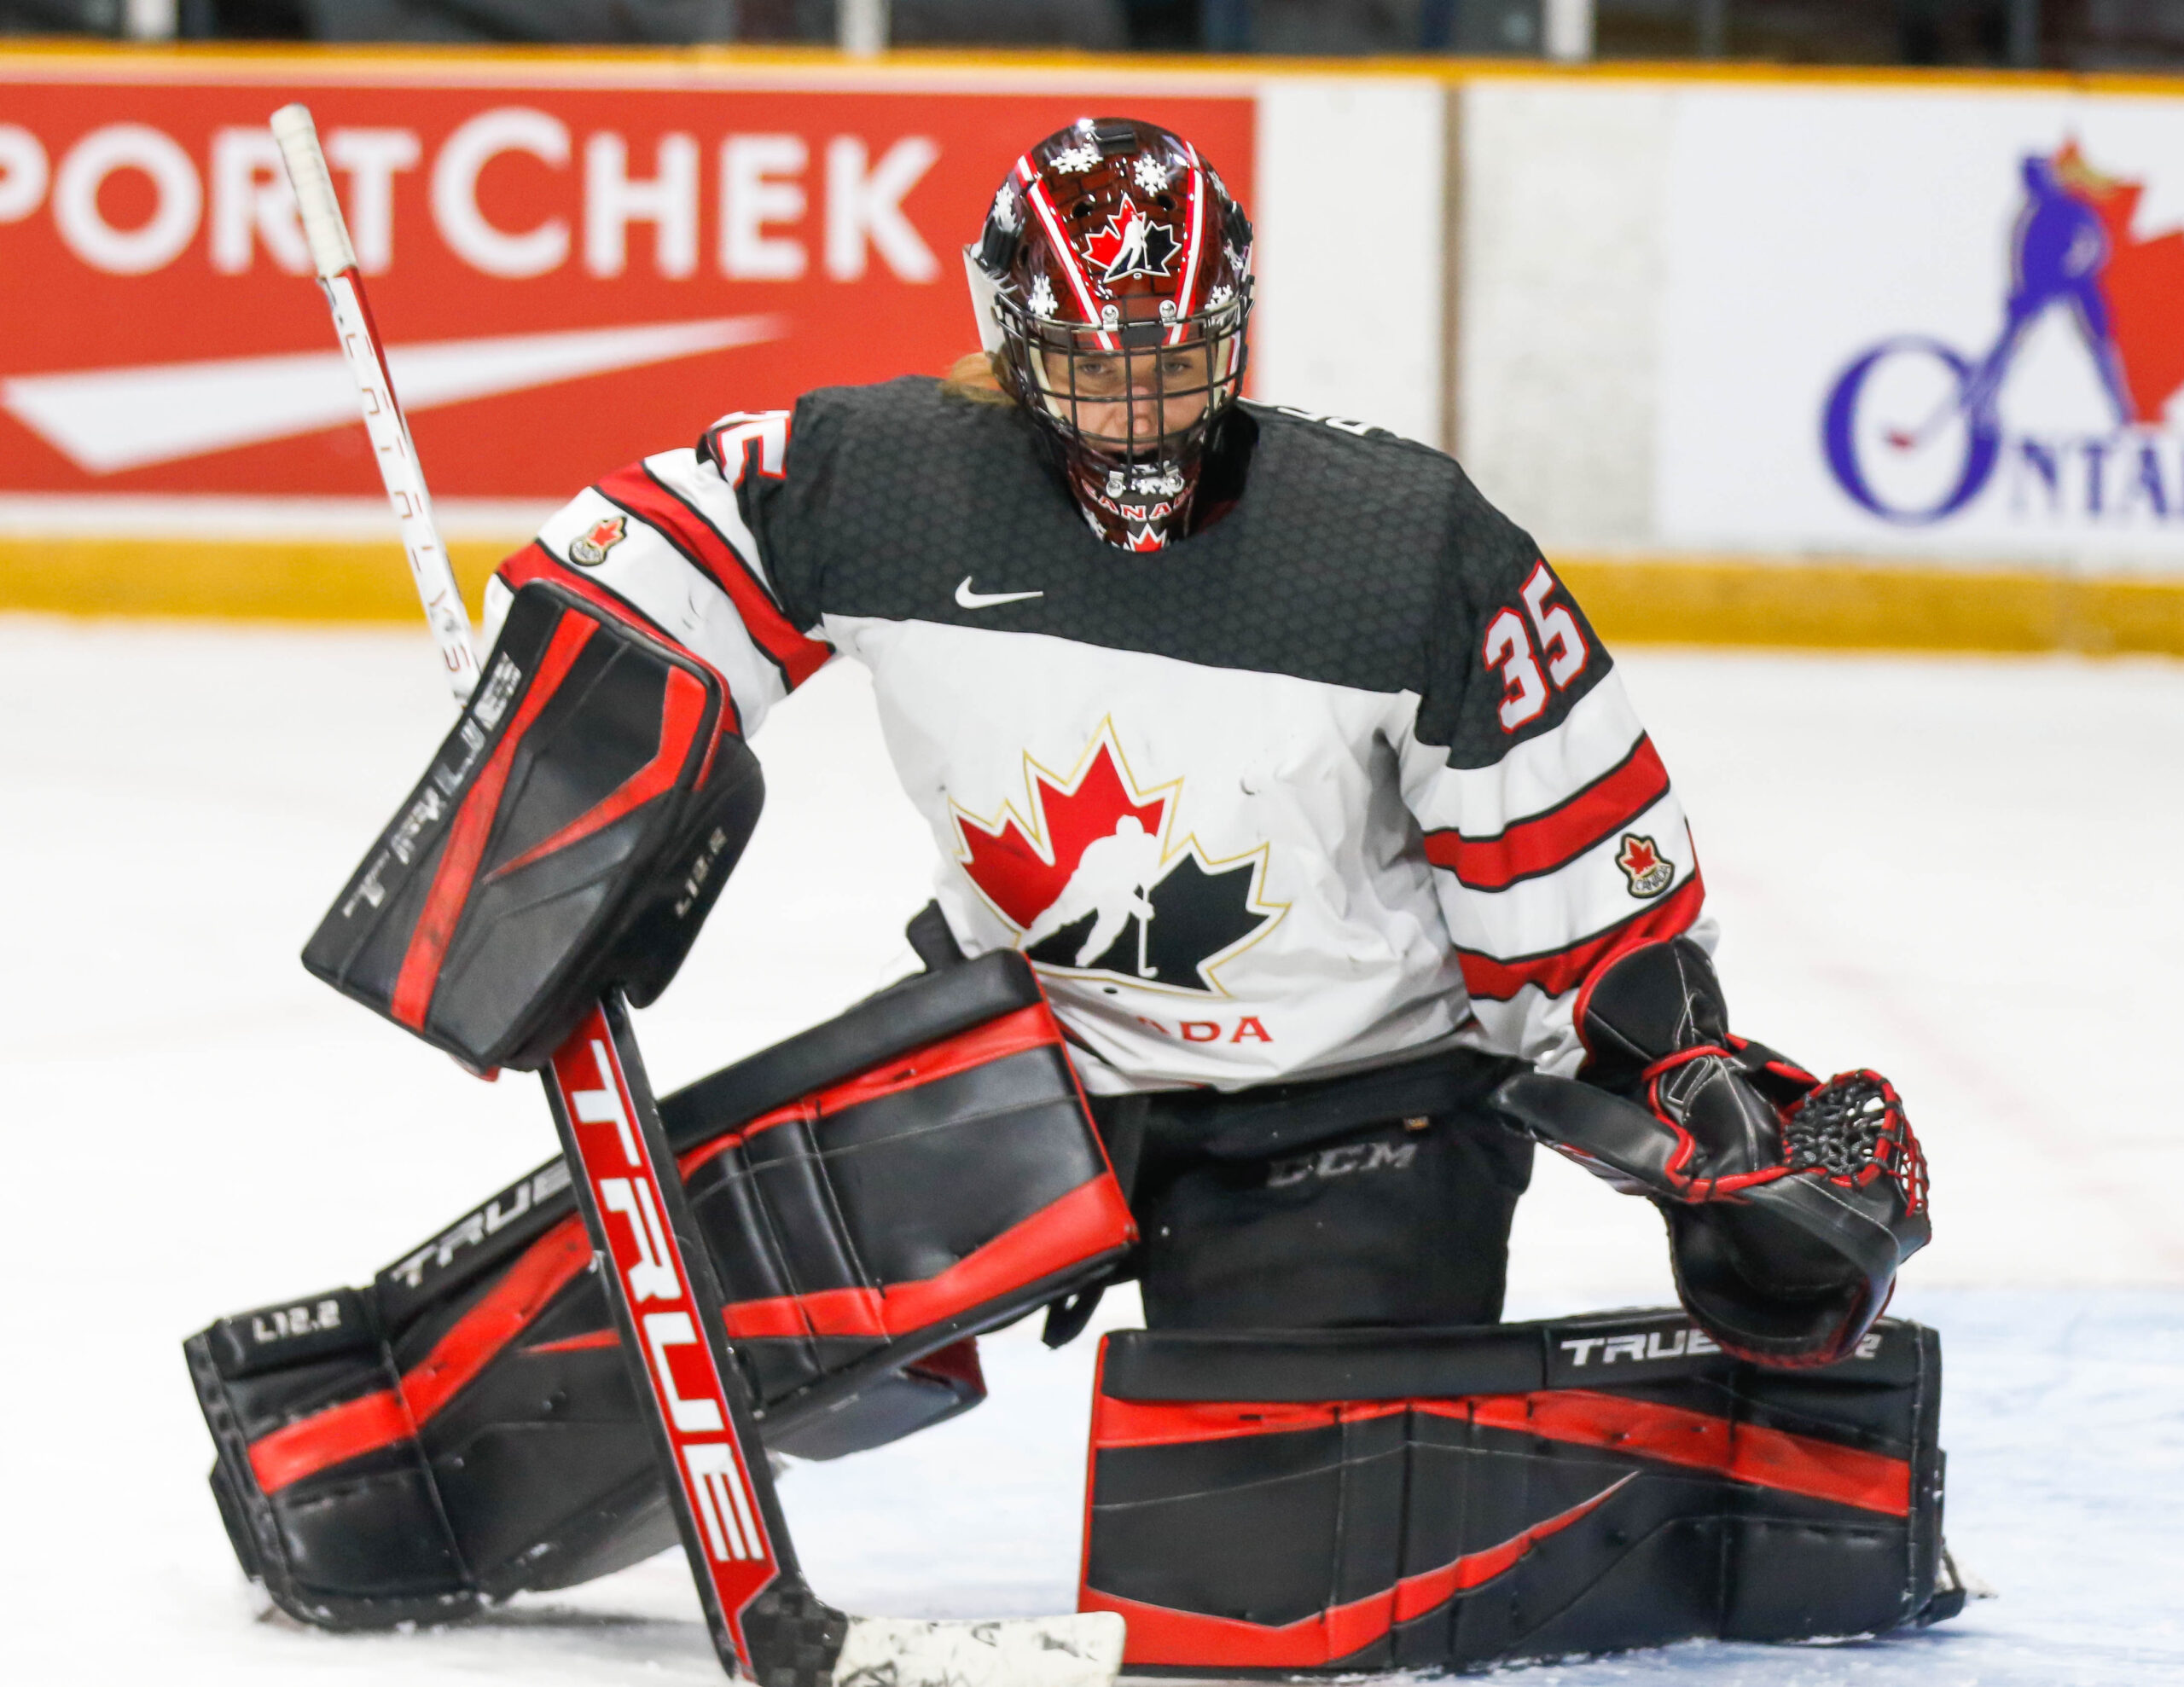 Canada Defeats Czechia Ahead of Matchup Against the US - The Hockey Writers Latest News, Analysis & More